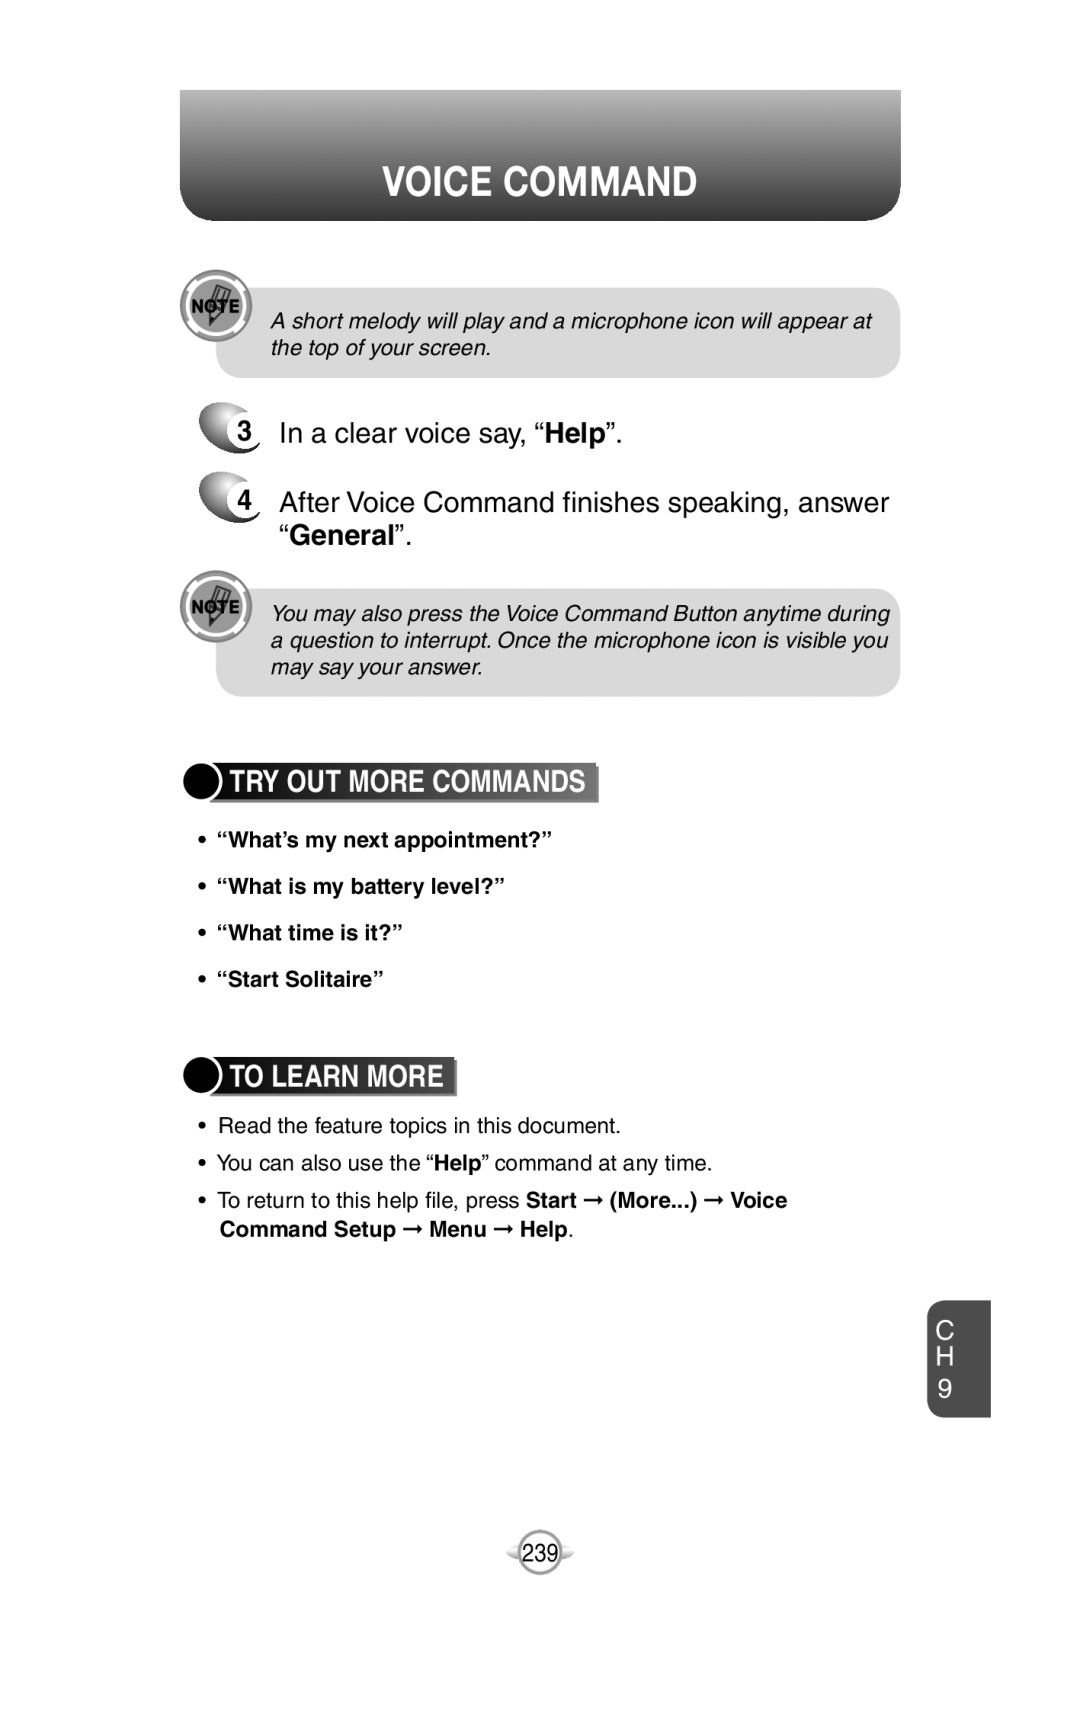 UTStarcom PN-820 user manual Try Out More Commands, To Learn More, Voice Command, 3In a clear voice say, “Help” 